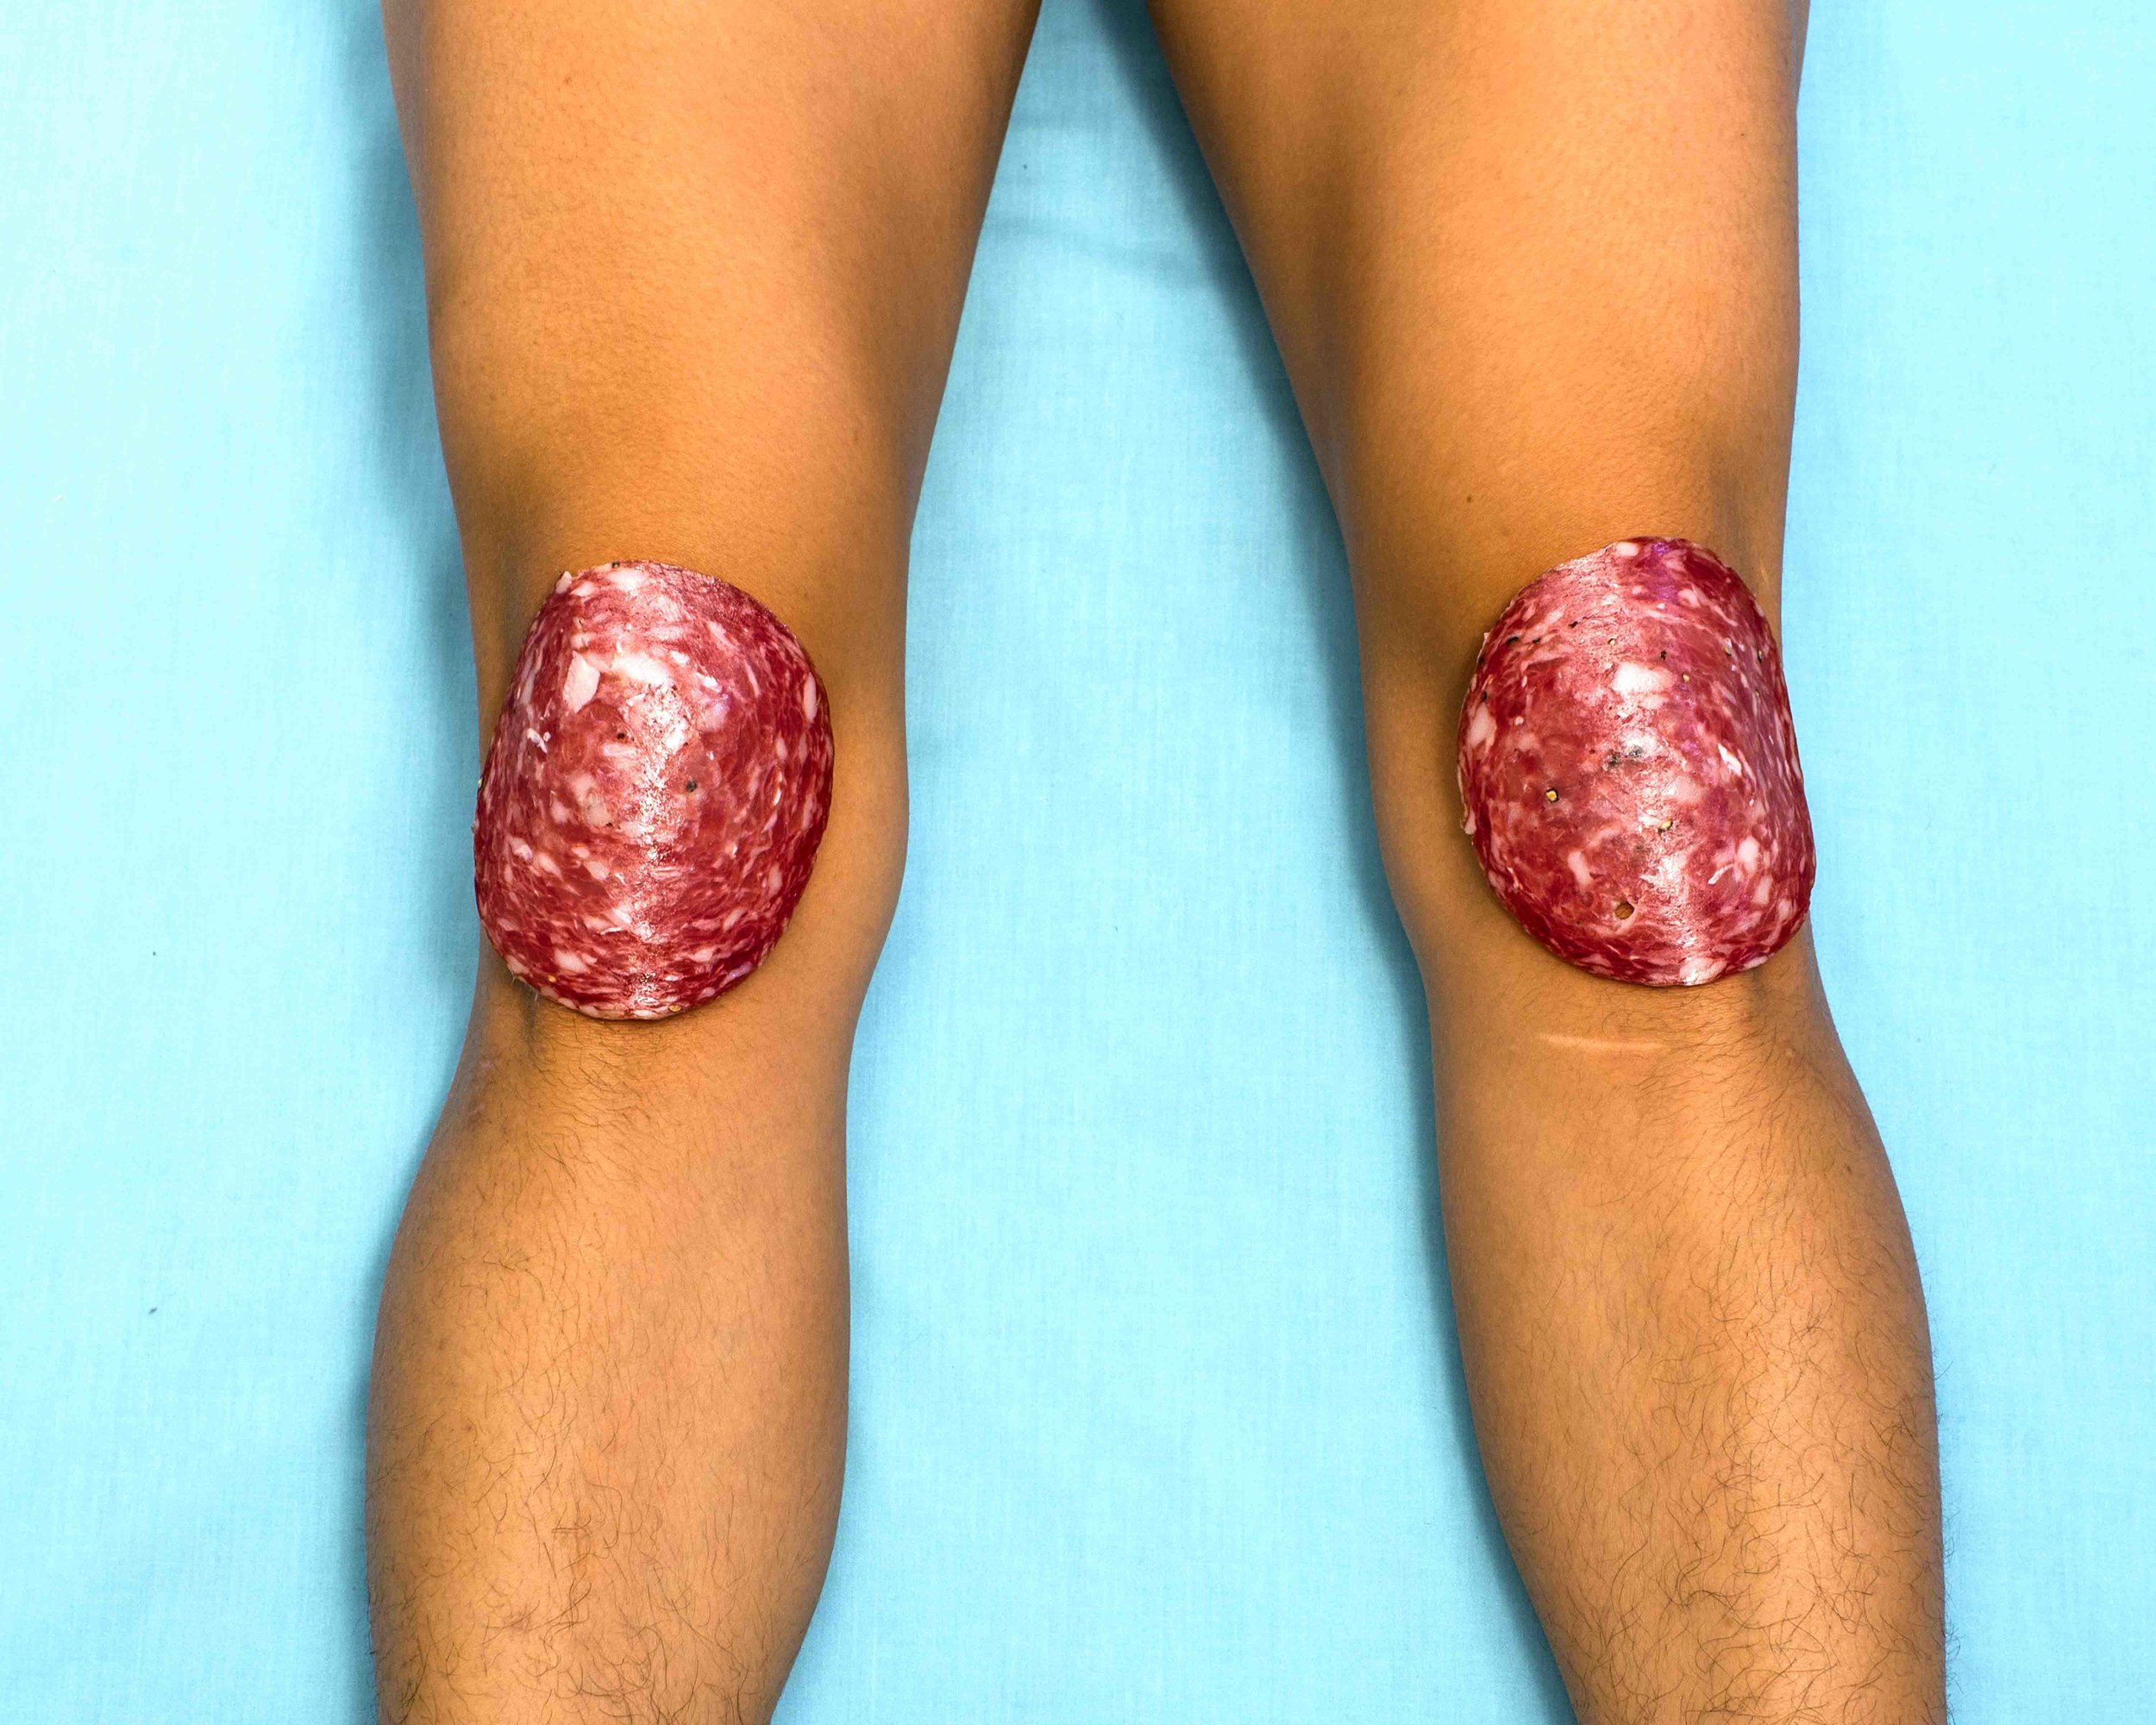 A Kneed for Salami